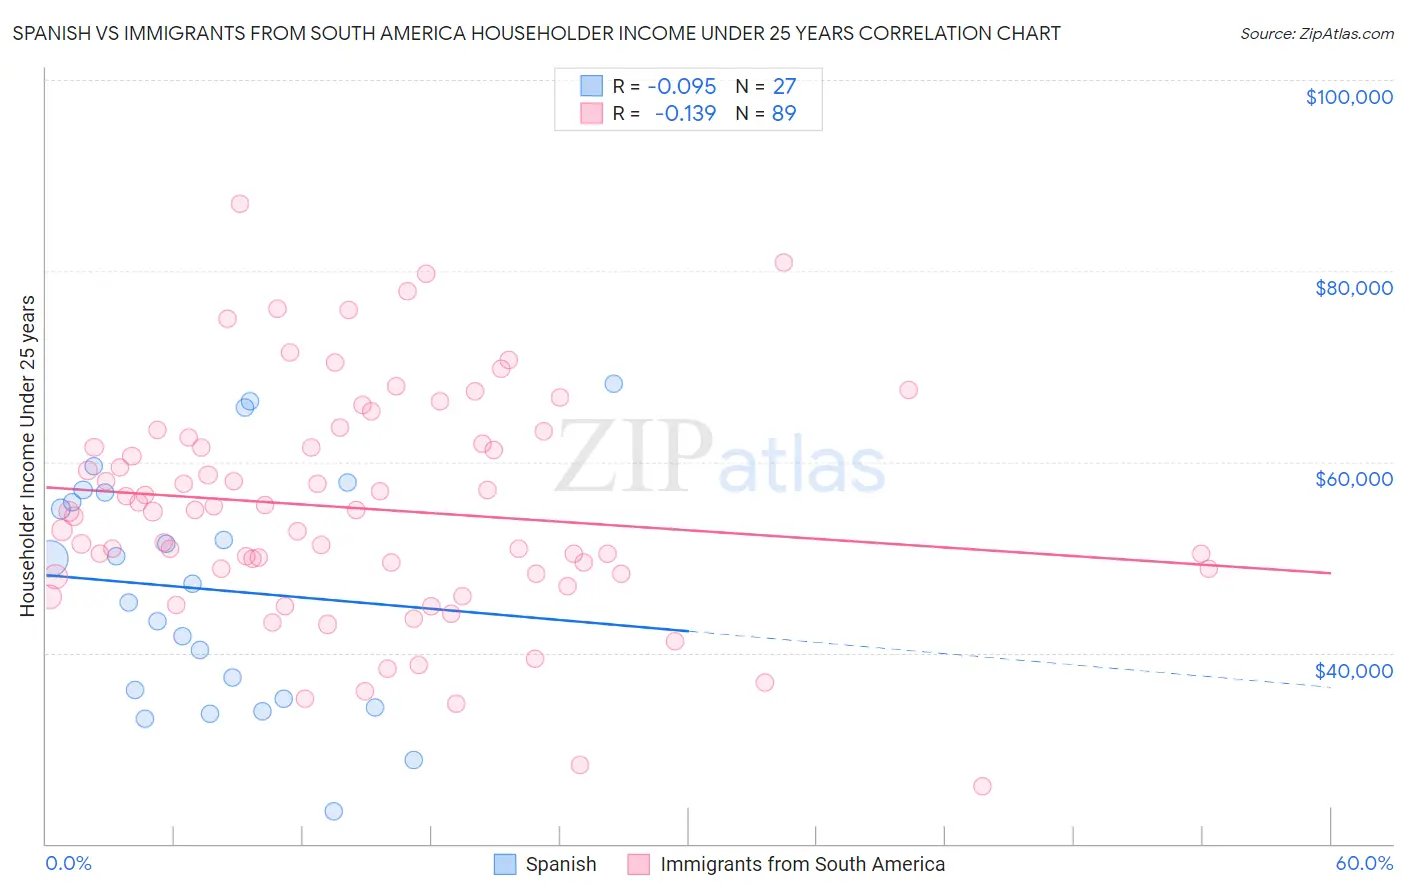 Spanish vs Immigrants from South America Householder Income Under 25 years